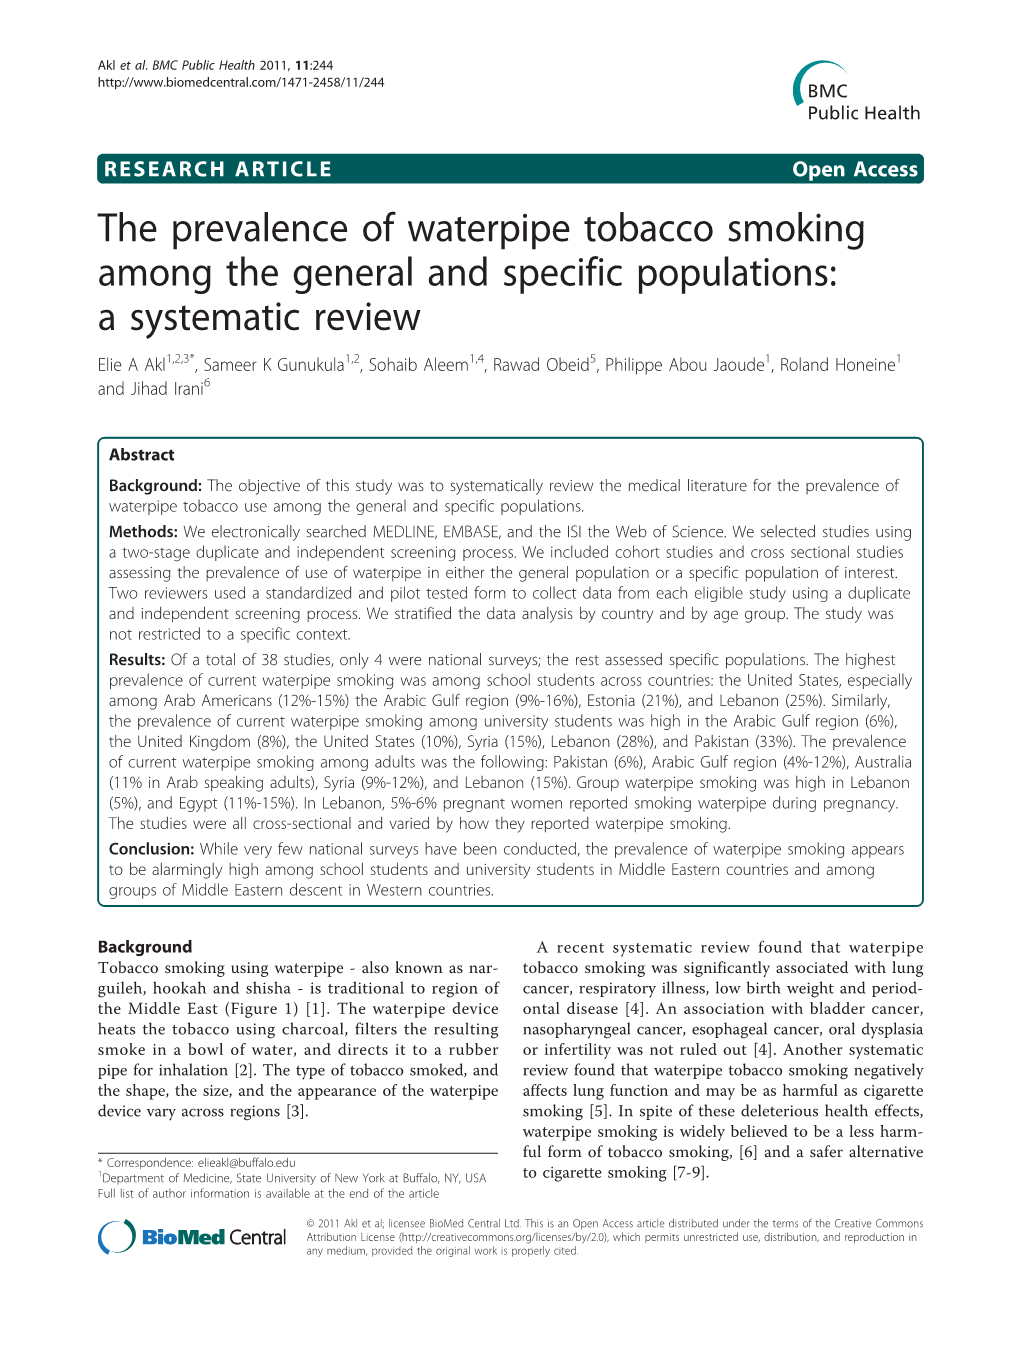 The Prevalence of Waterpipe Tobacco Smoking Among the General And